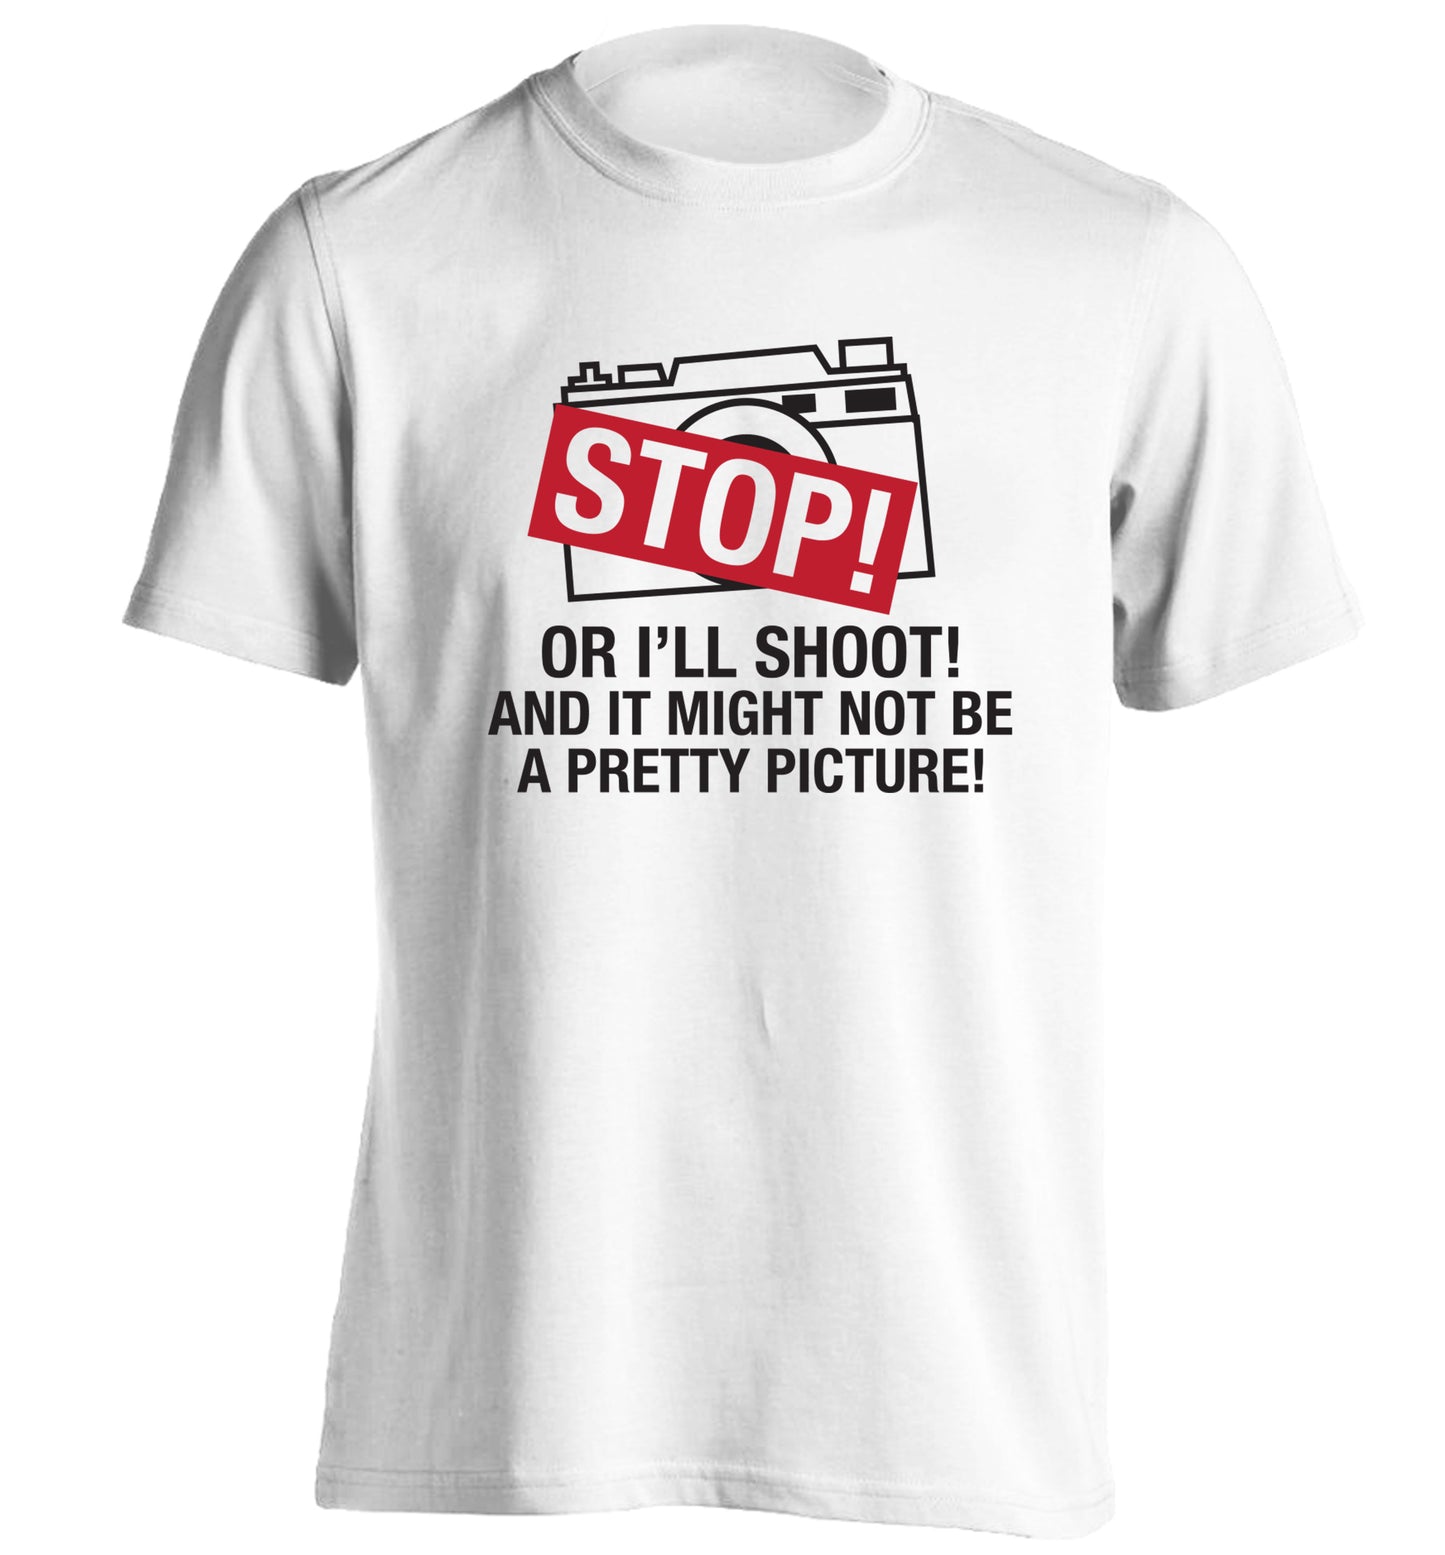 Stop or I'll shoot and it won't be a pretty picture adults unisex white Tshirt 2XL